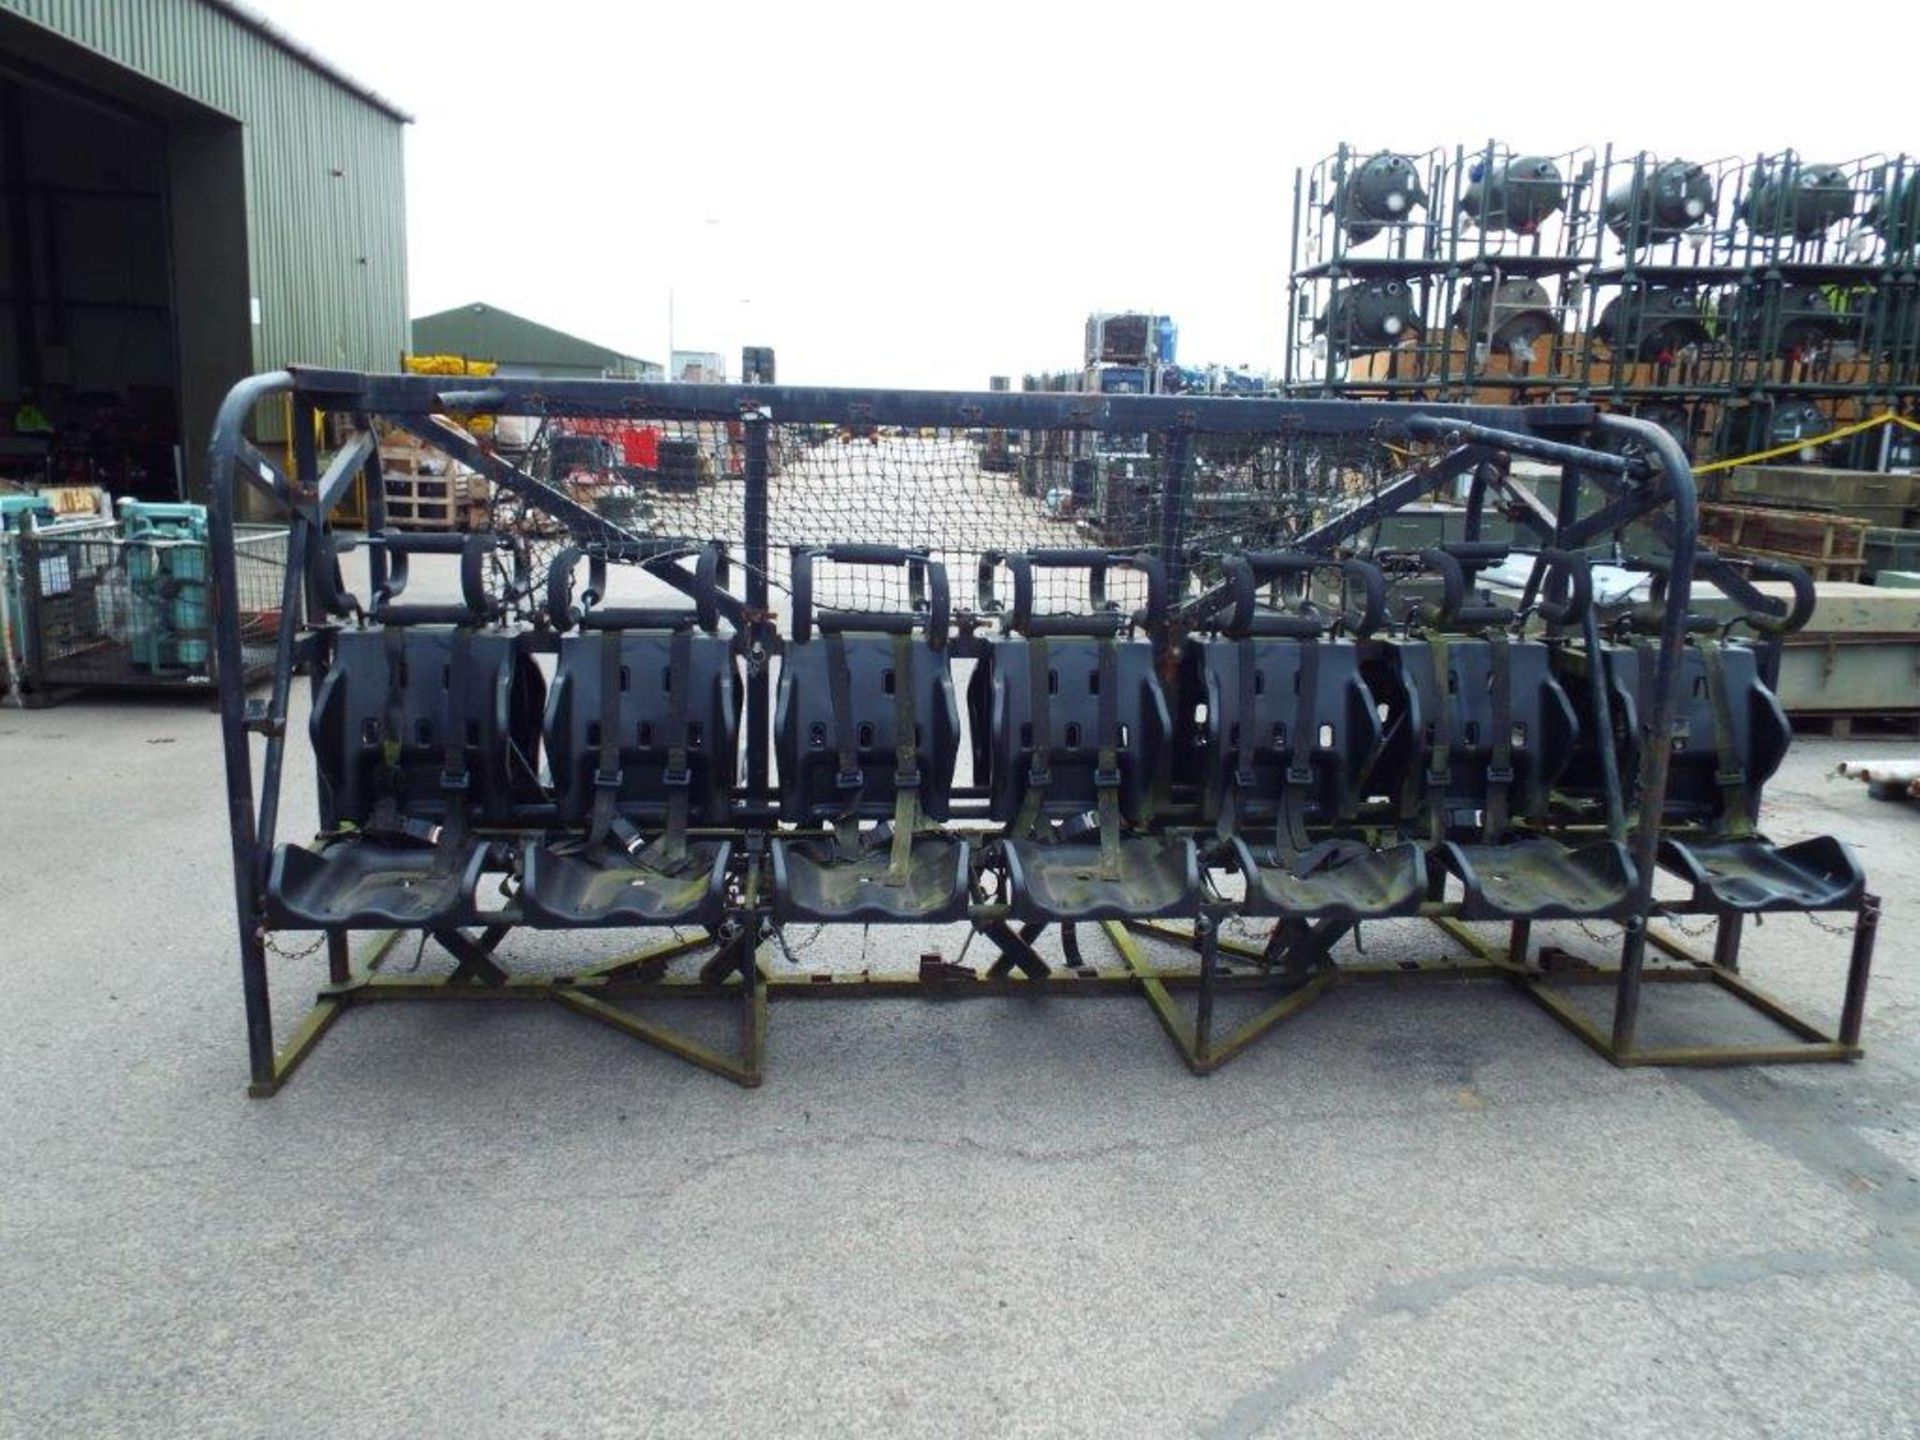 14 Man Security Seat suitable for Leyland Dafs, Bedfords etc - Image 4 of 8